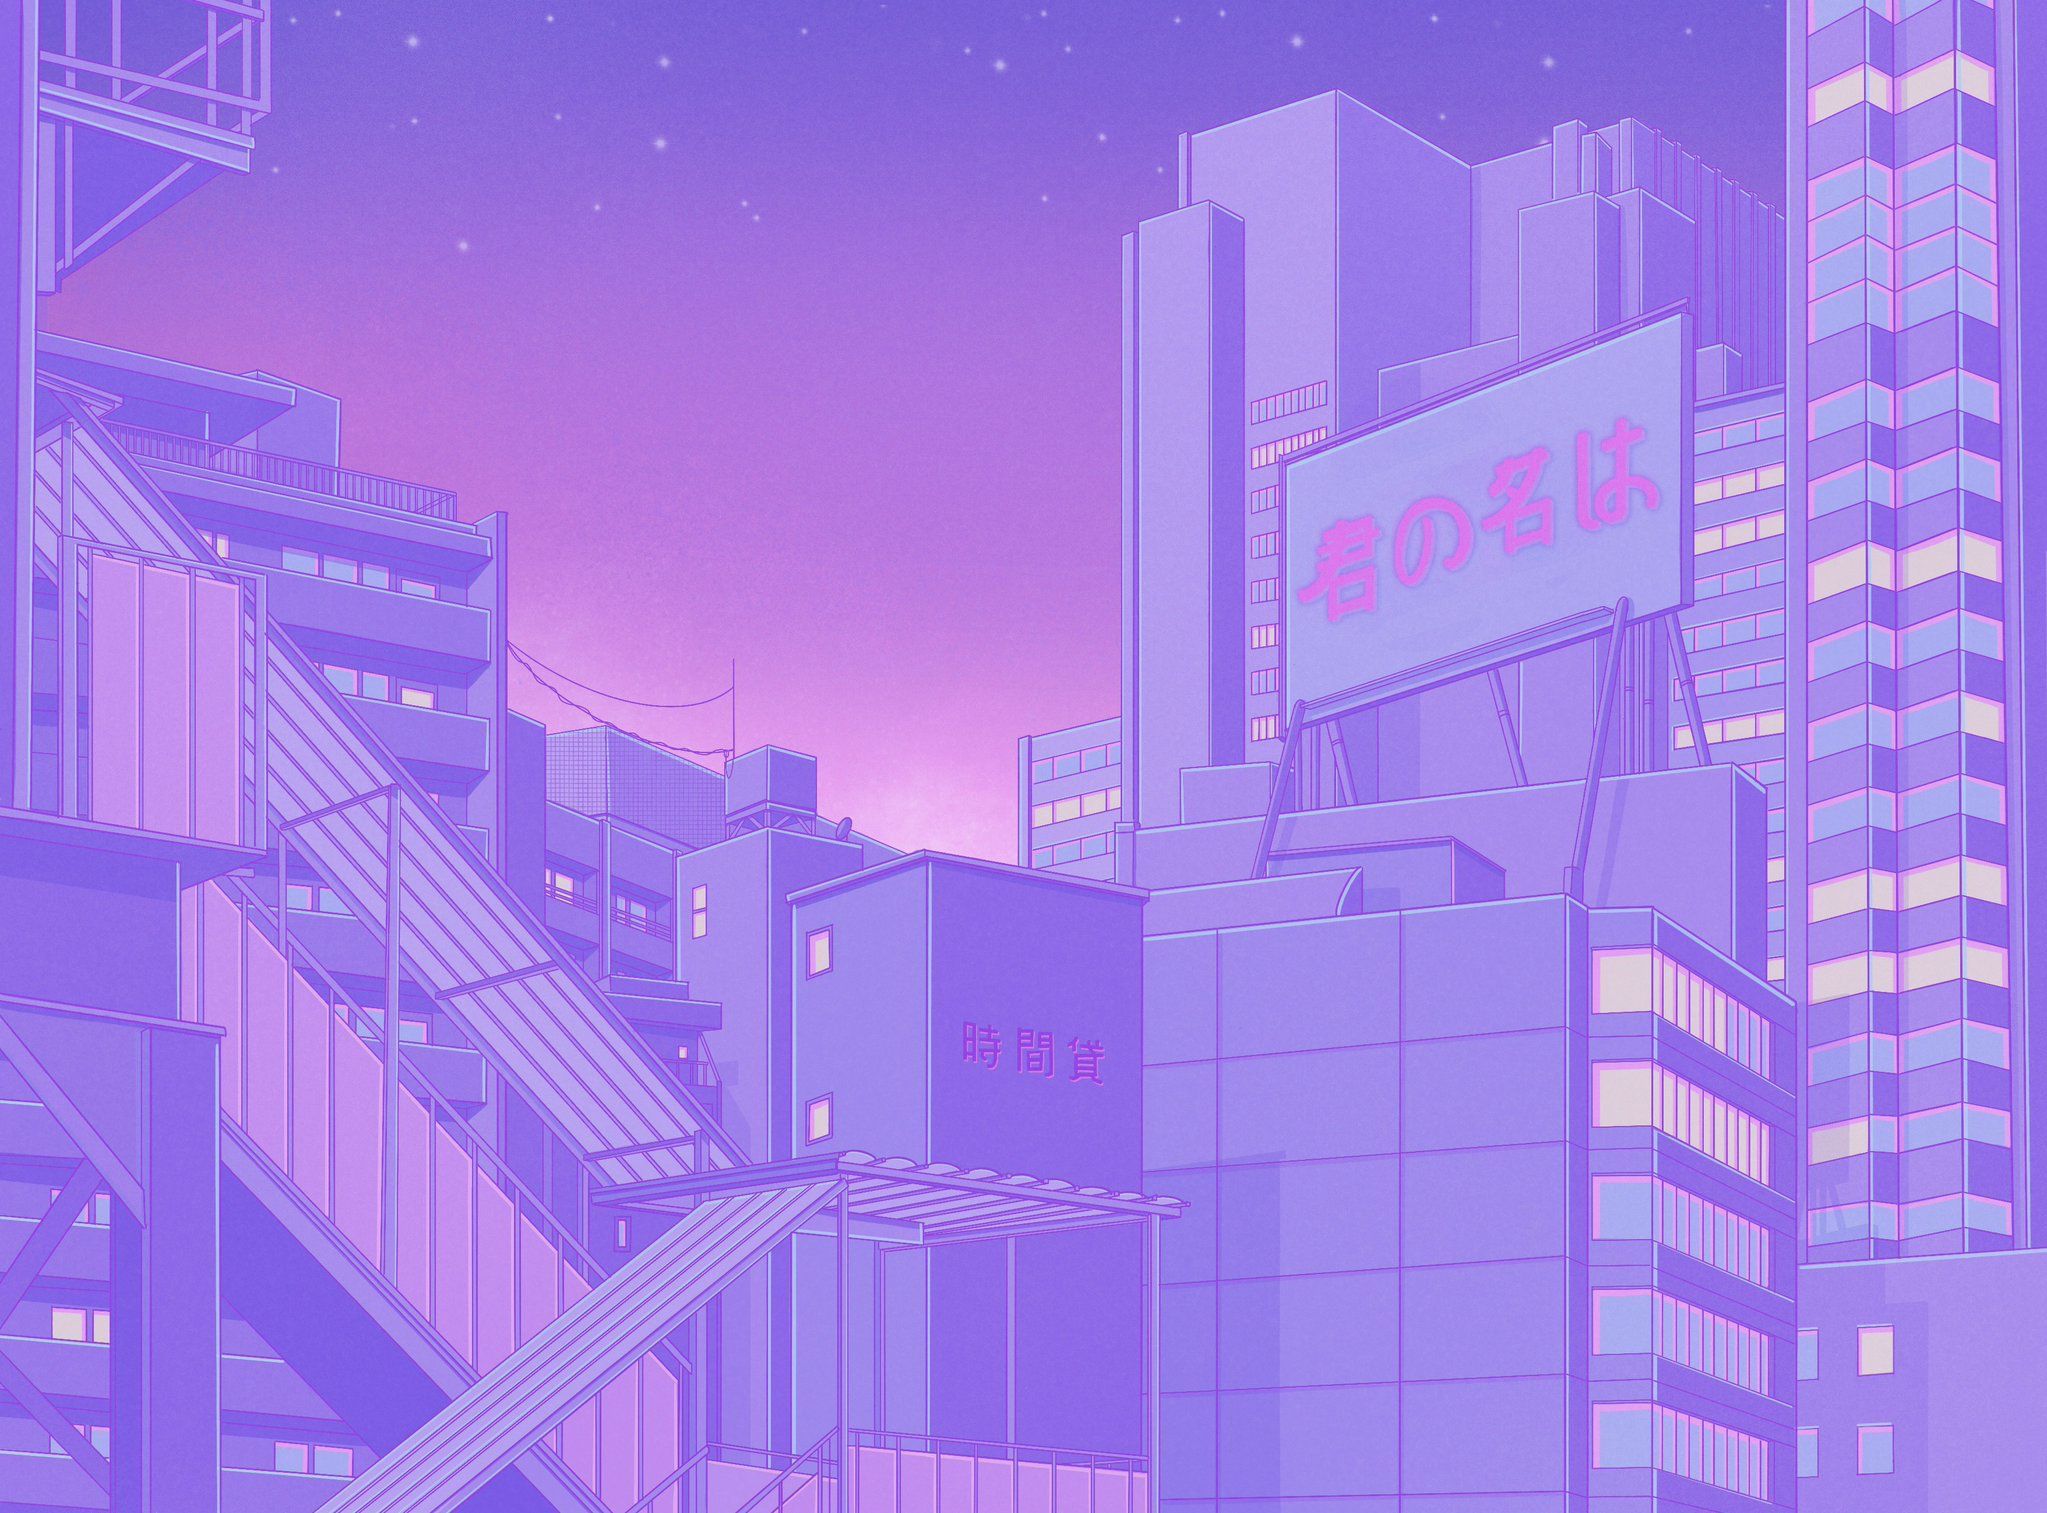 100+] Purple Anime Aesthetic Wallpapers | Wallpapers.com